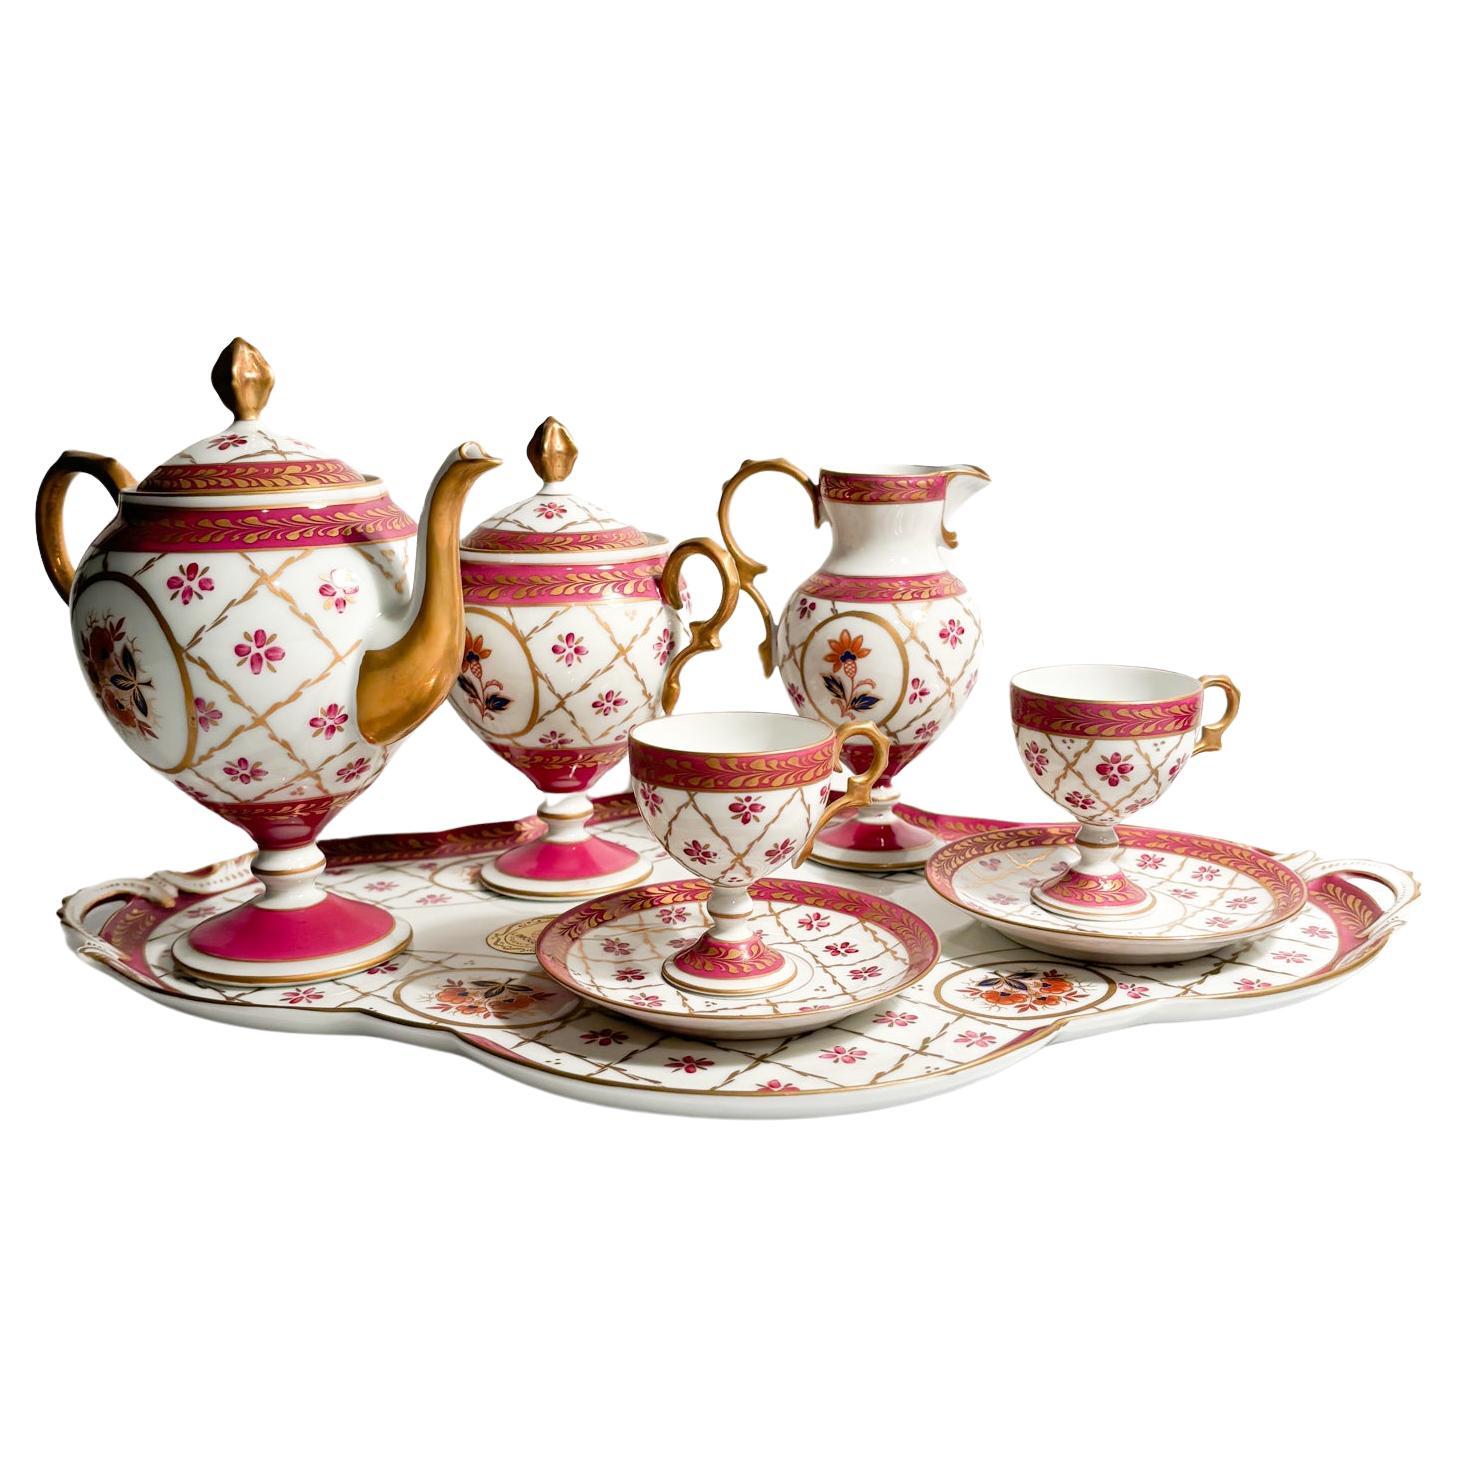 Tête-à-tête Coffee Set in Limoges Porcelain from the 1950s